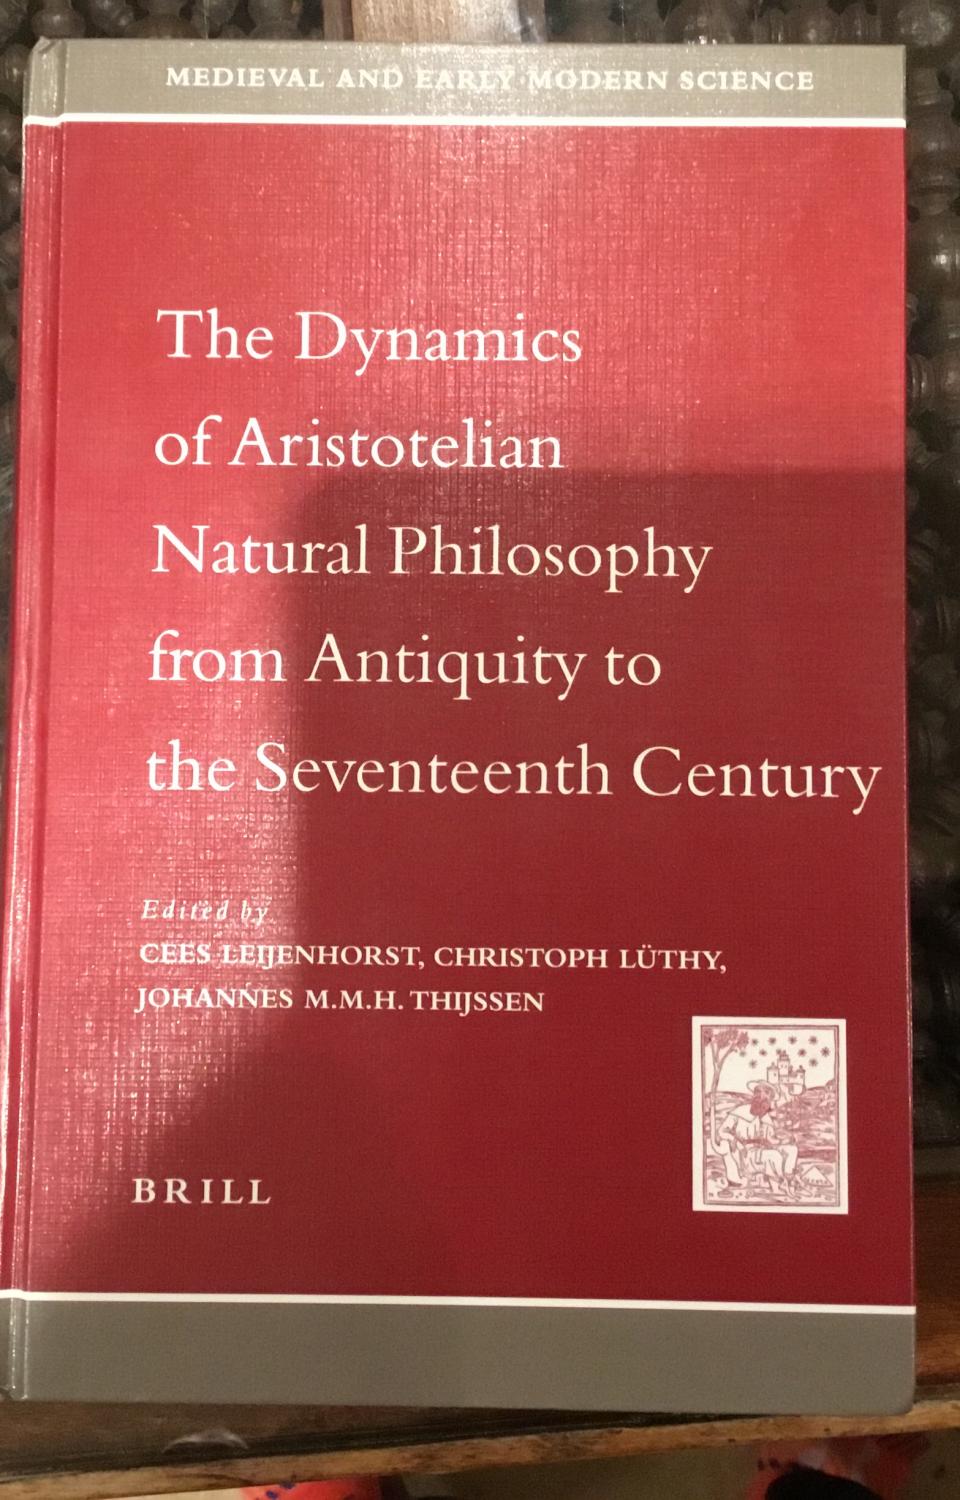 The Dynamics of Aristotelian Natural Philosophy from Antiquity to the Seventeenth Century - ed Leijenhorst, Luthy,Thijssen